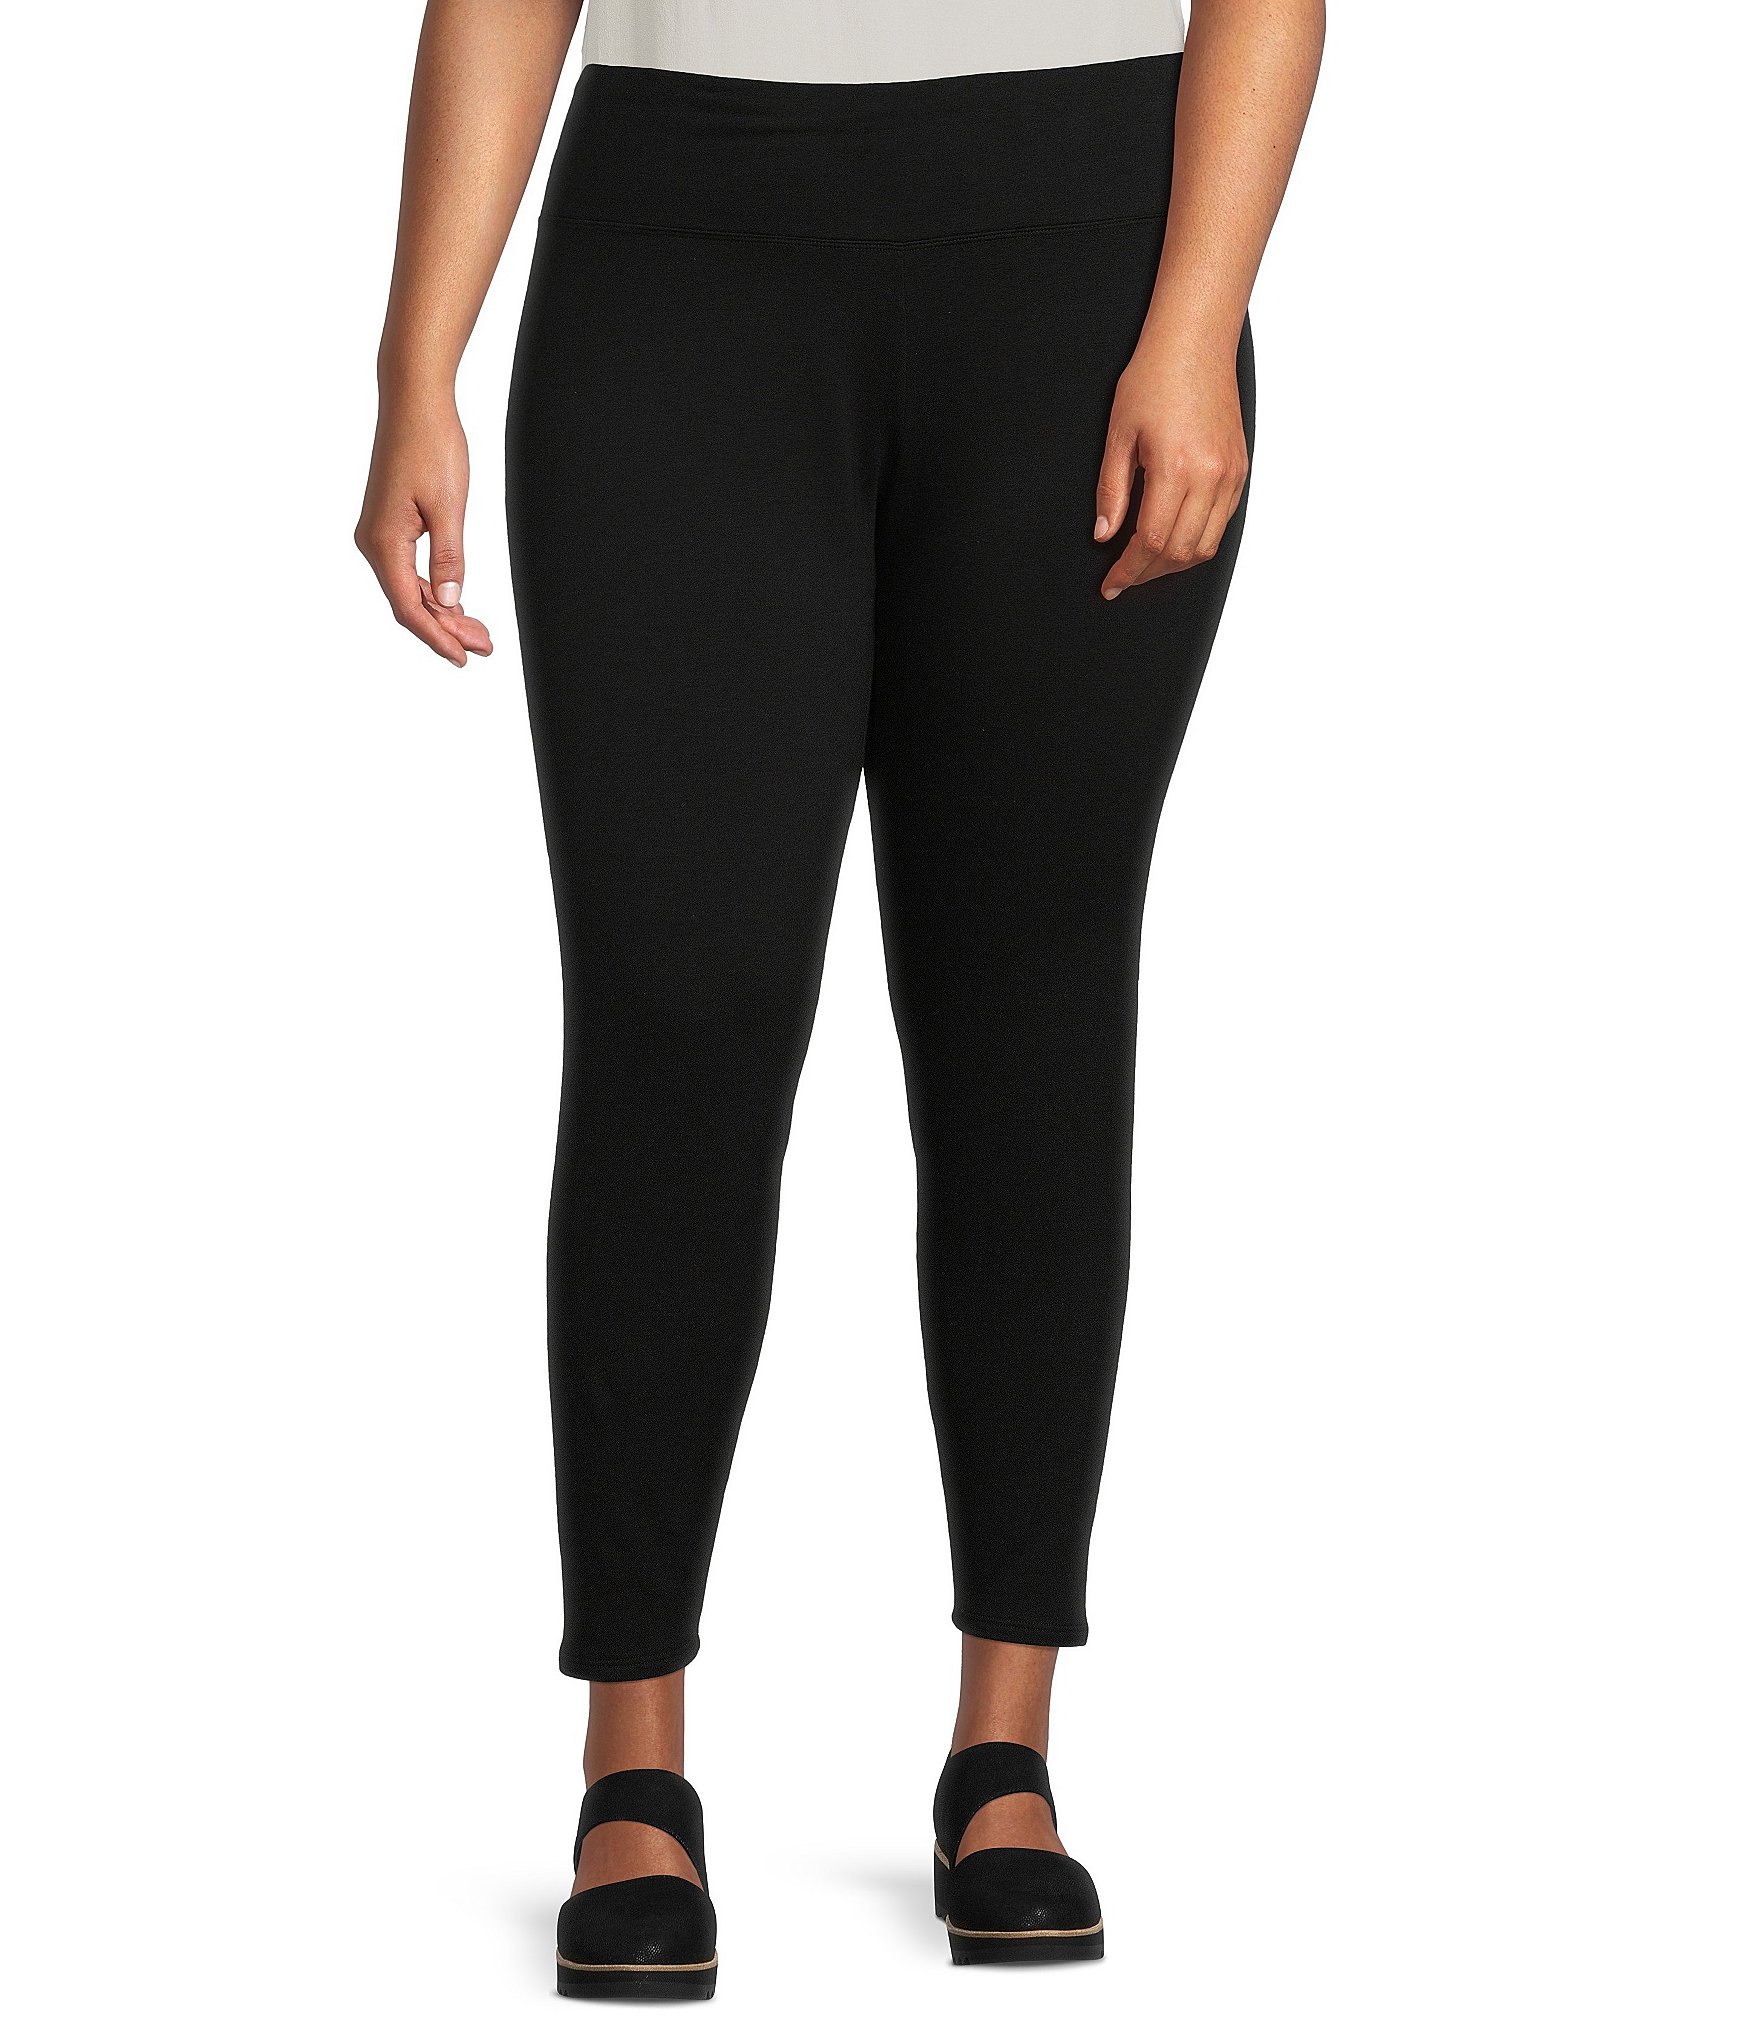 Off White color stretchable cotton ankle Leggings - LGA16